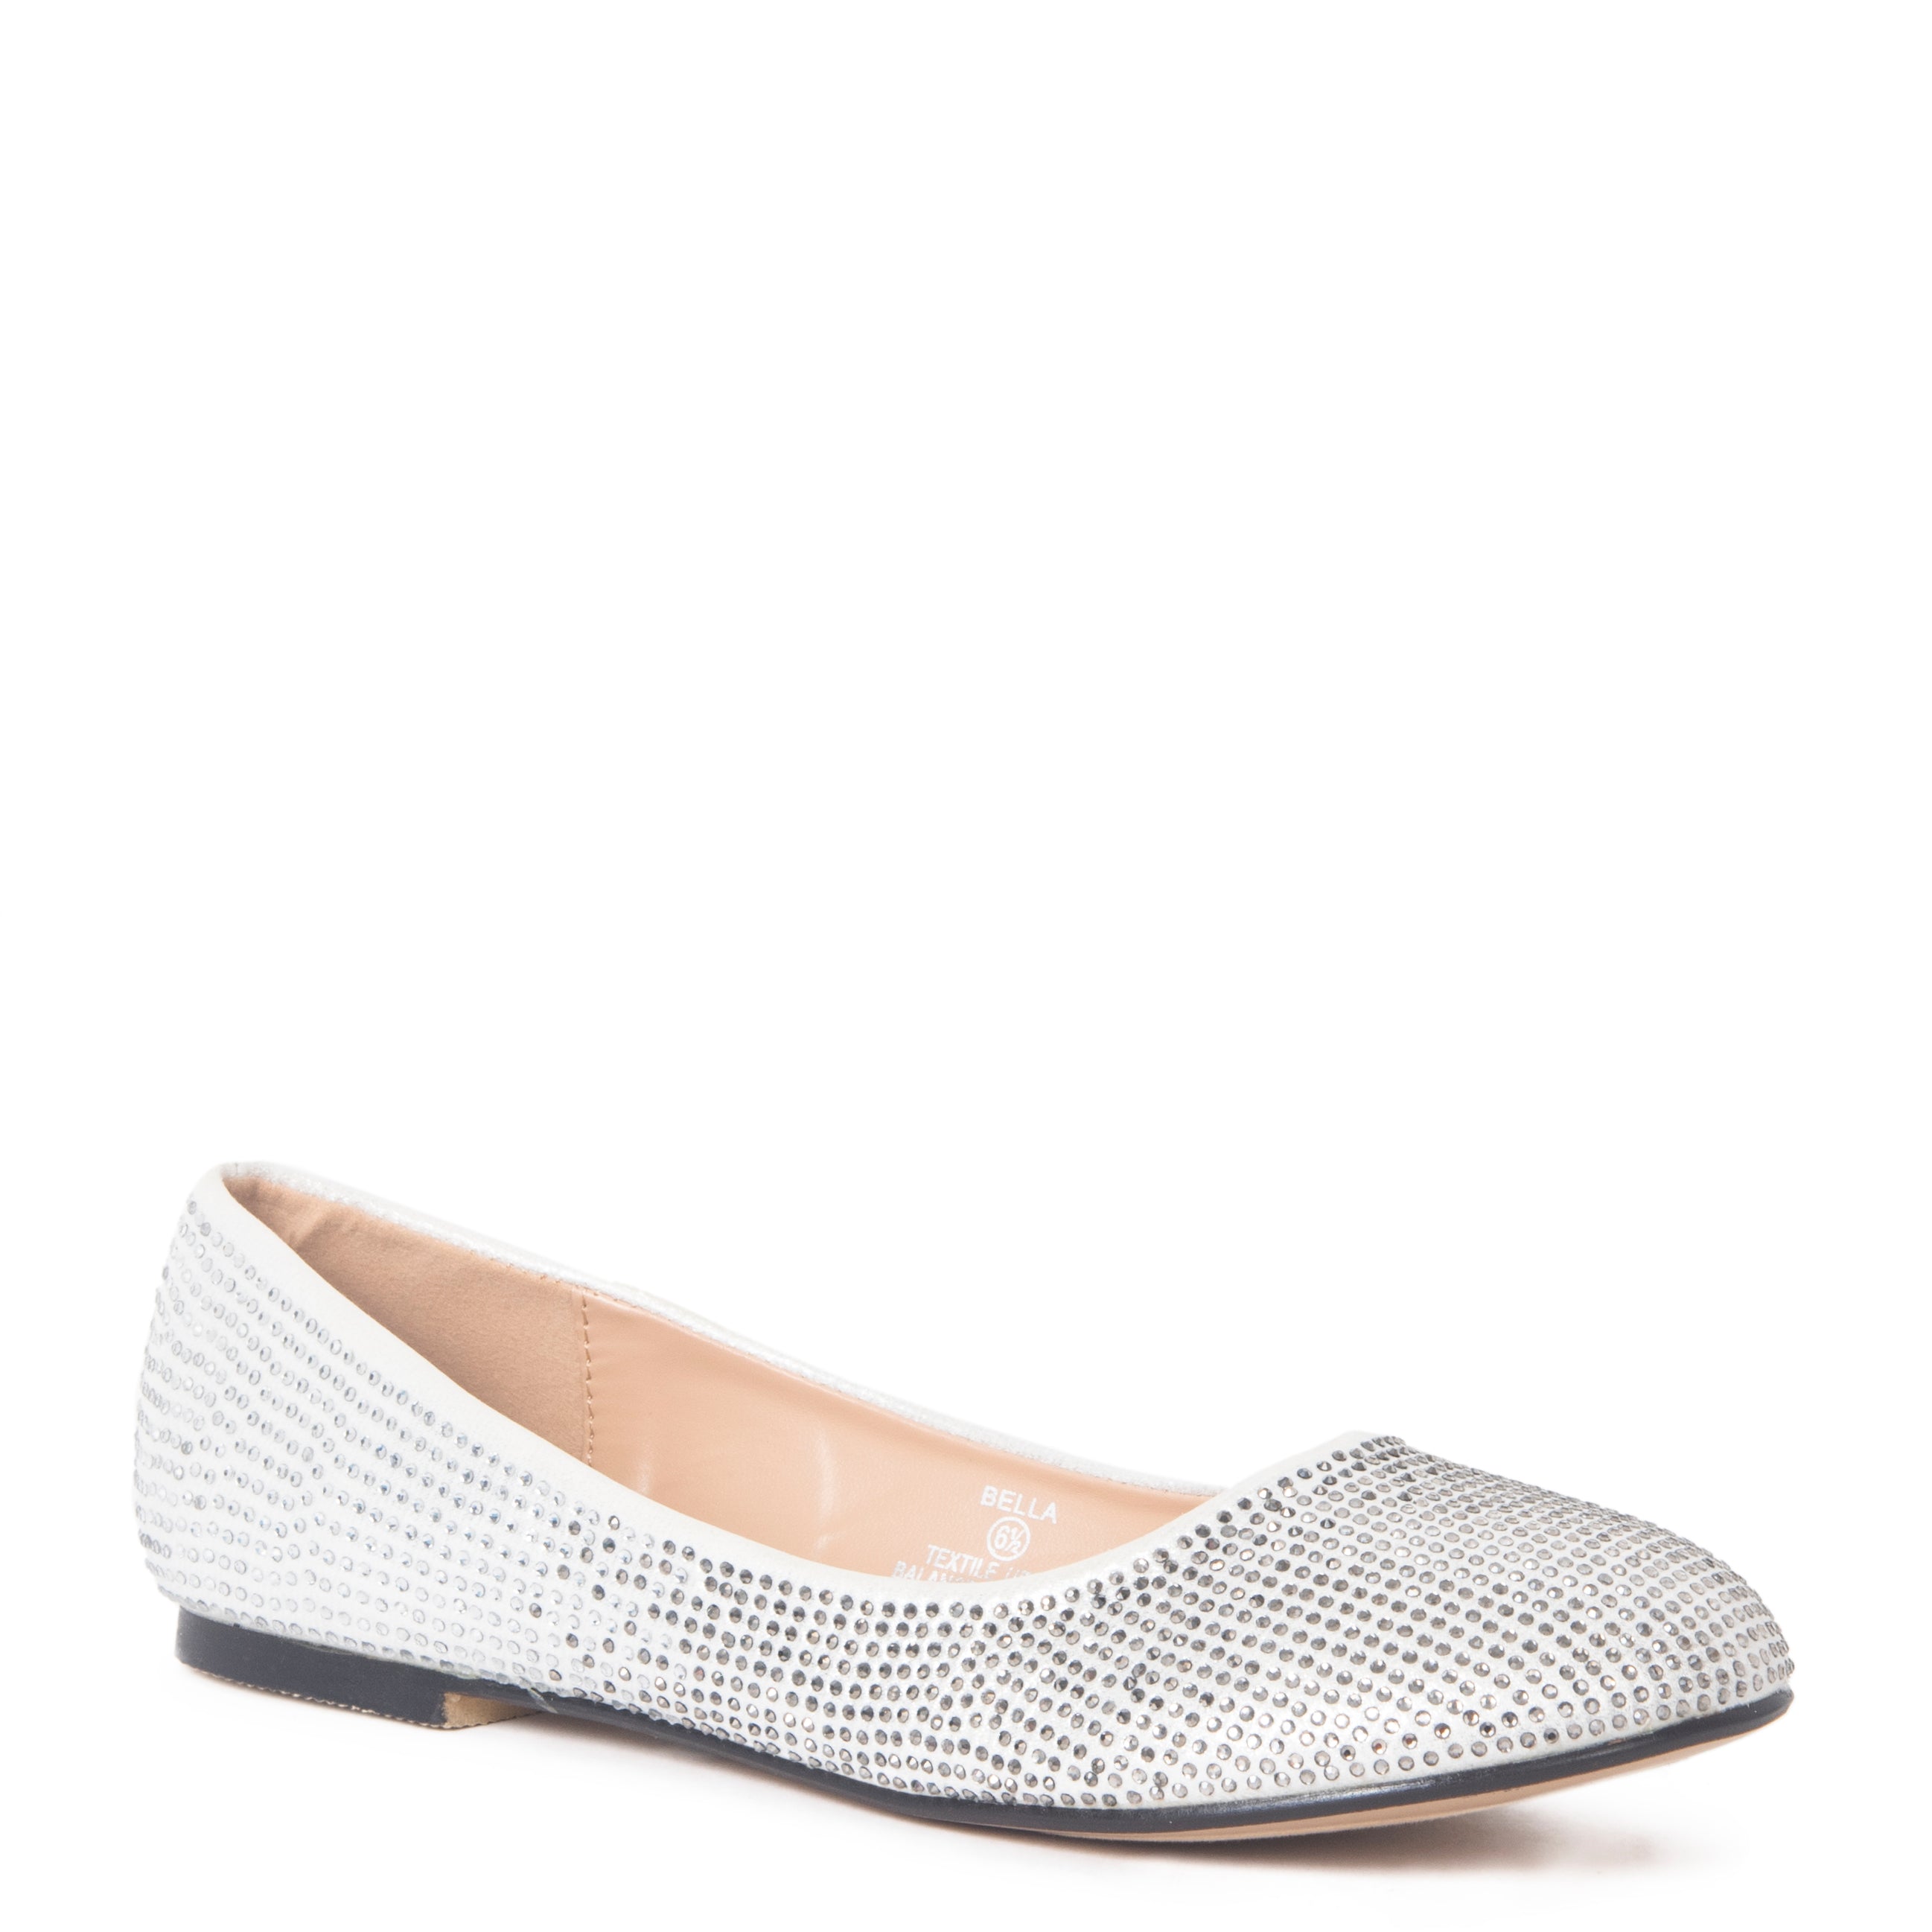 BELLA POINTY TOE PUMP FLATS WITH SPARKLY RHINESTONE DETAILING